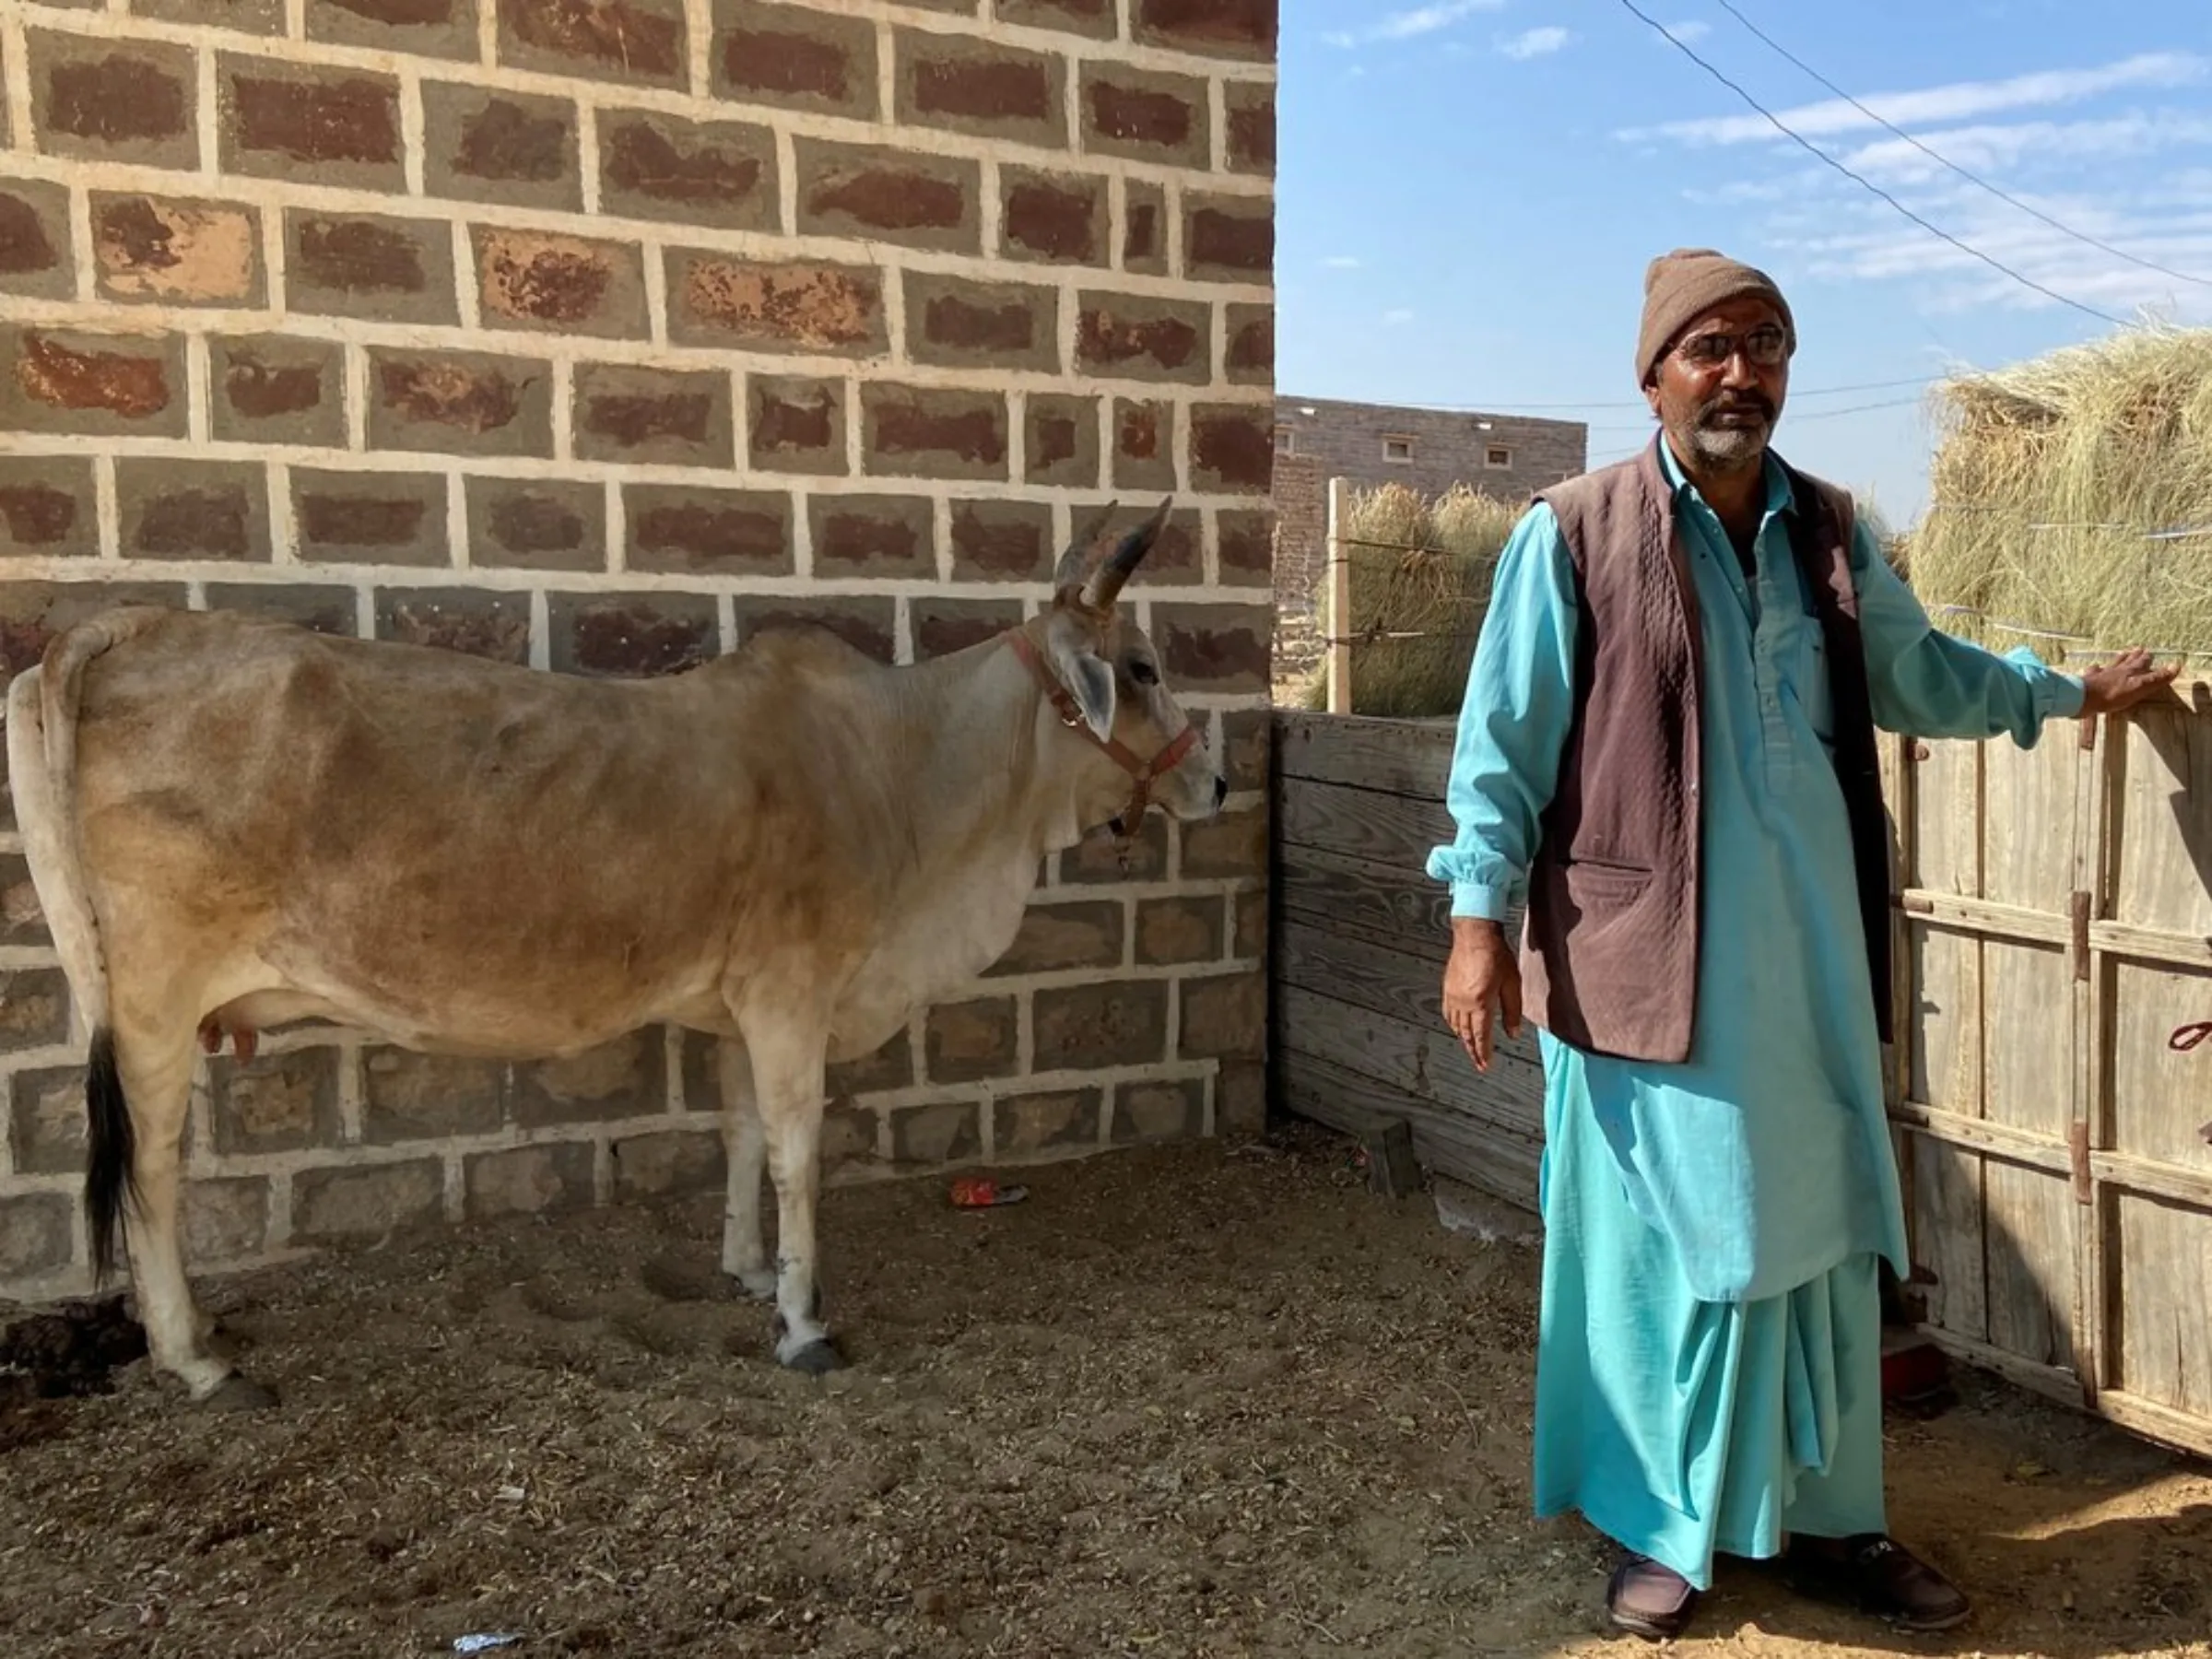 Mohammad Sujawal Mehr poses for a picture with his cow in his village of Bhadla, Rajasthan, India, December 12, 2021